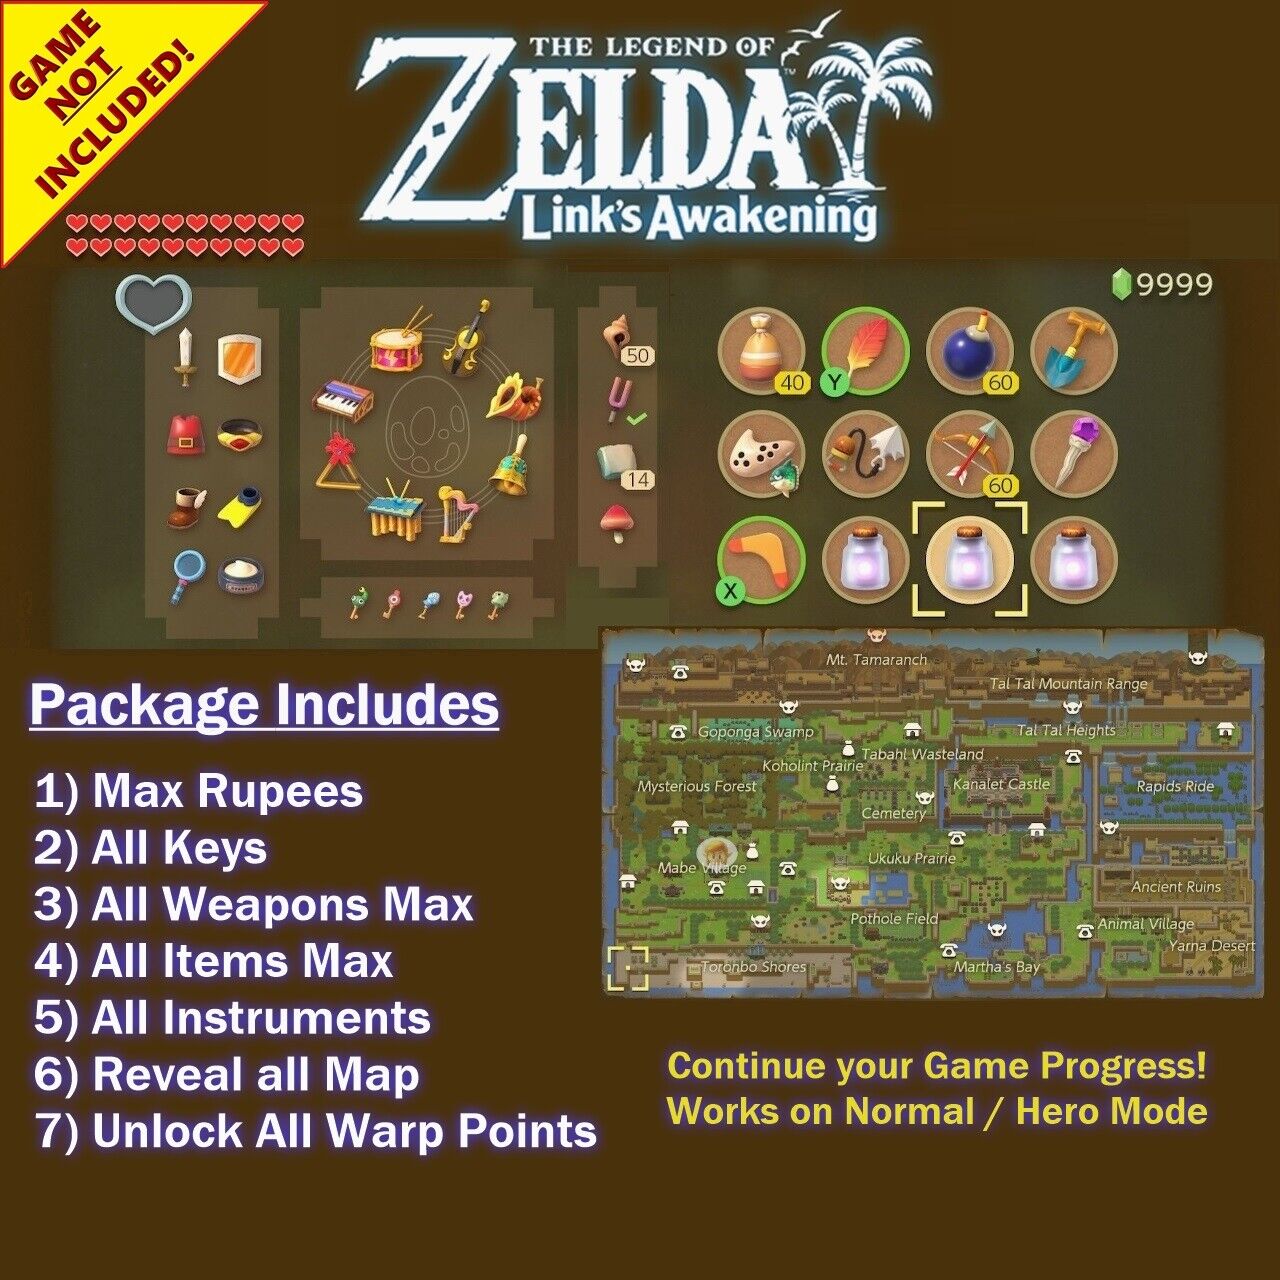 The Legend of Zelda Links Awakening Strategy Guide (2nd Edition